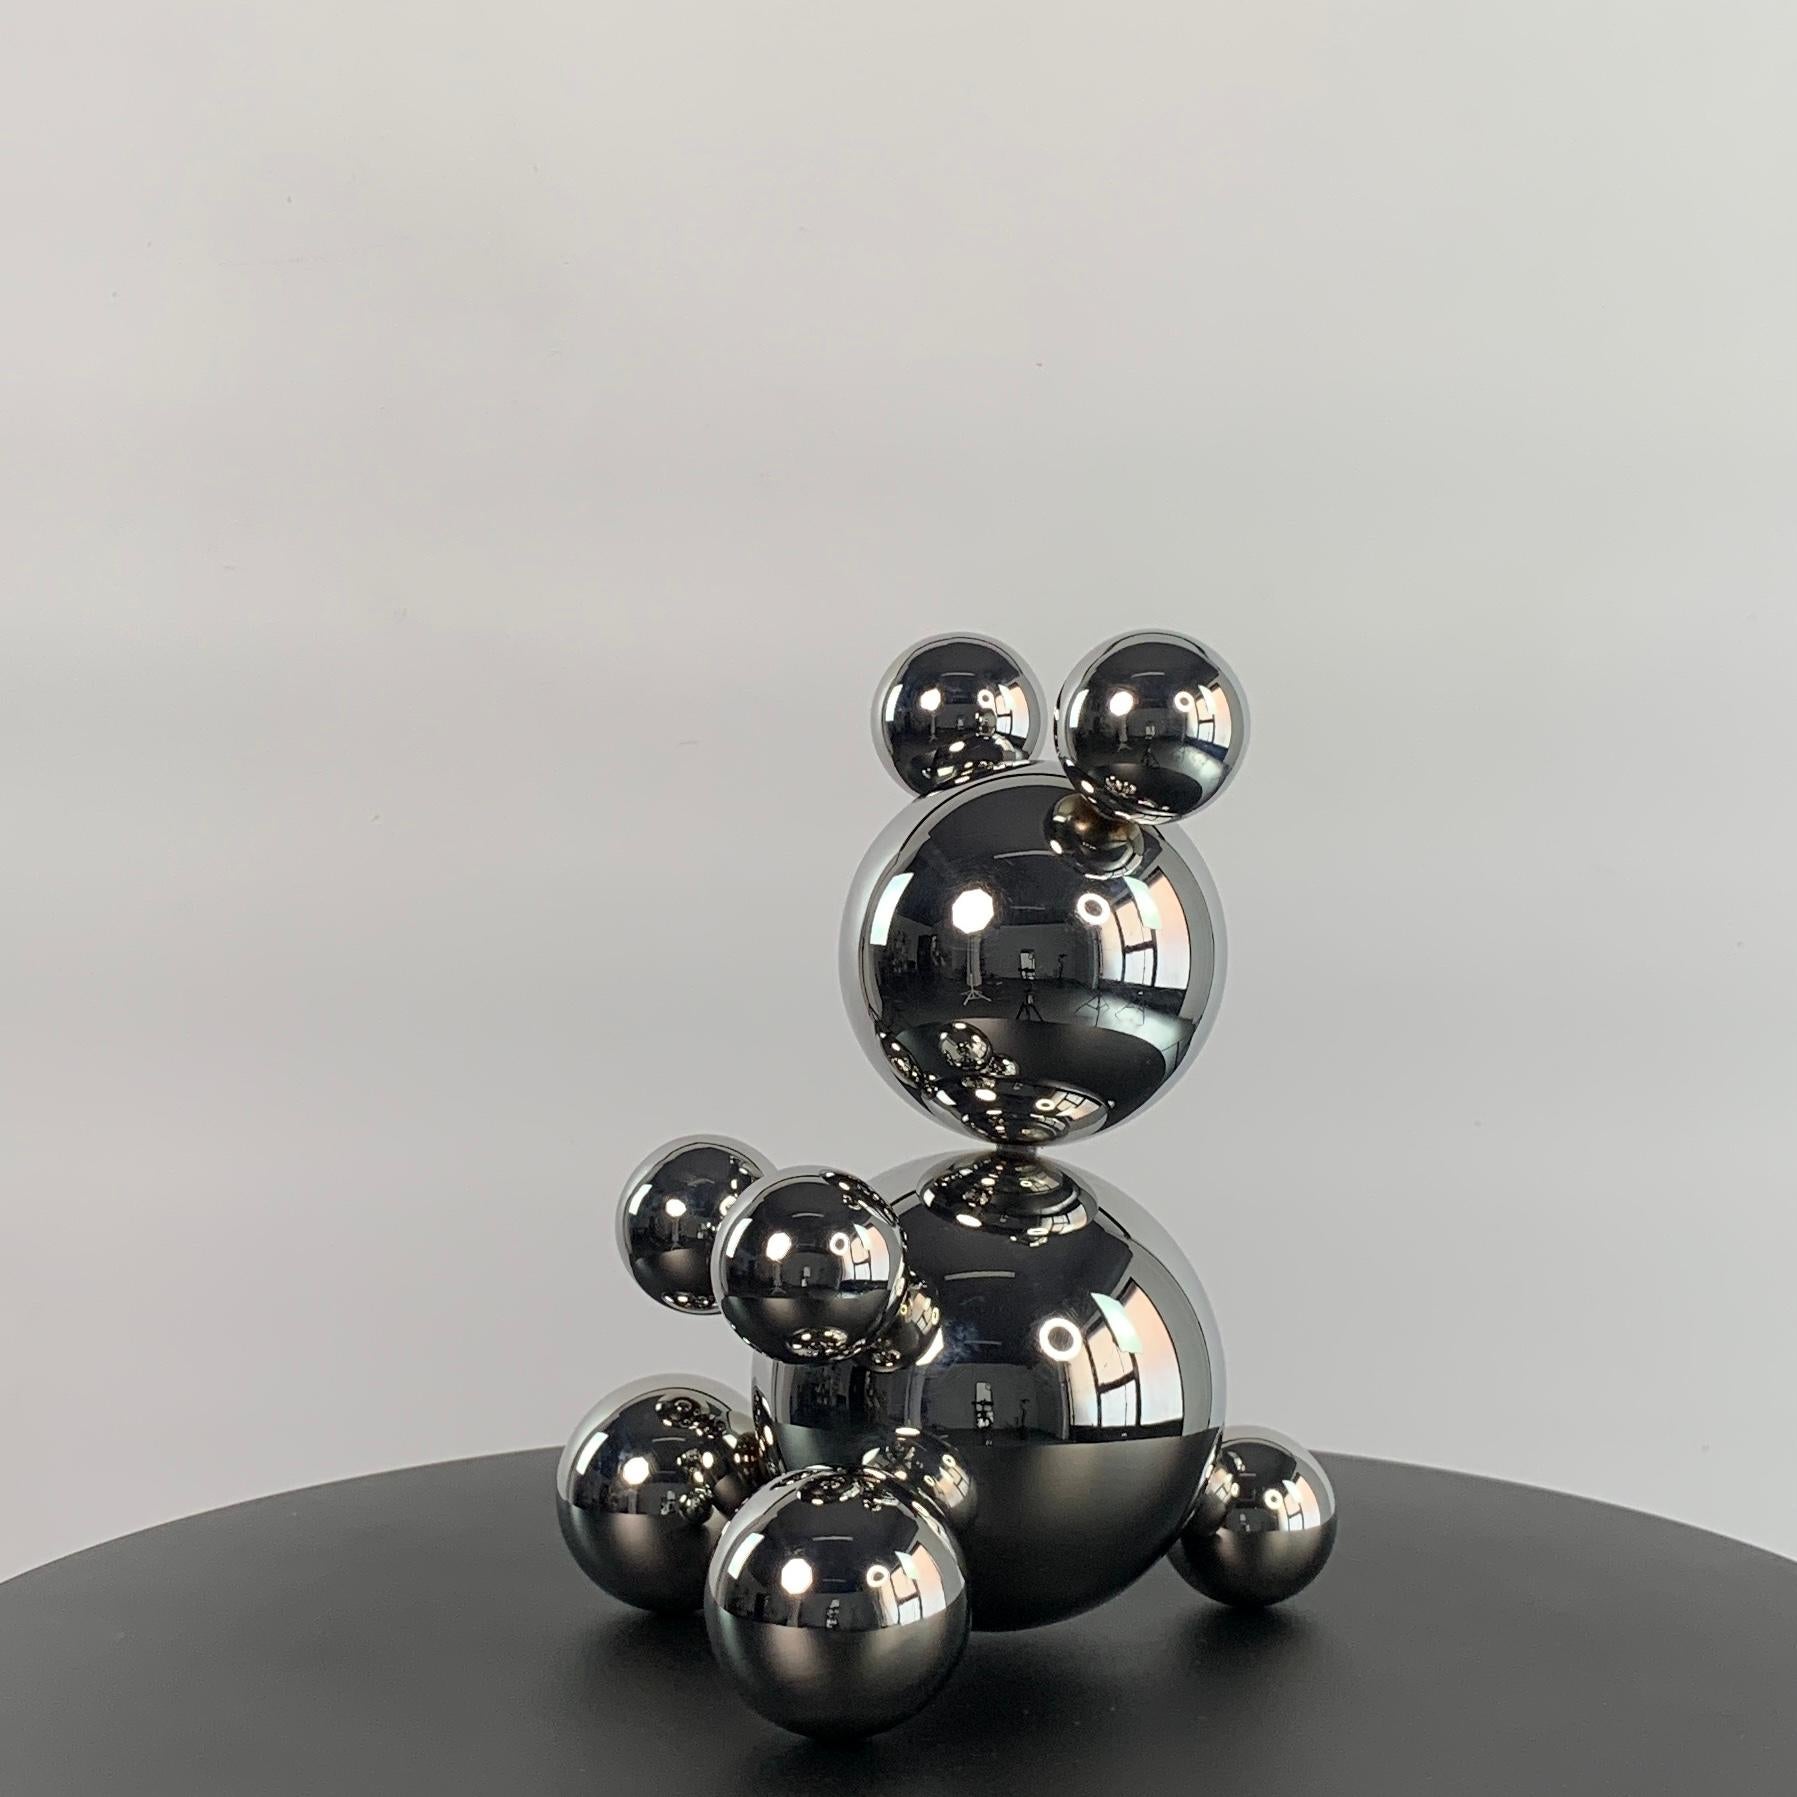 Small Stainless Steel Bear 'Diksy' - Sculpture by IRENA TONE